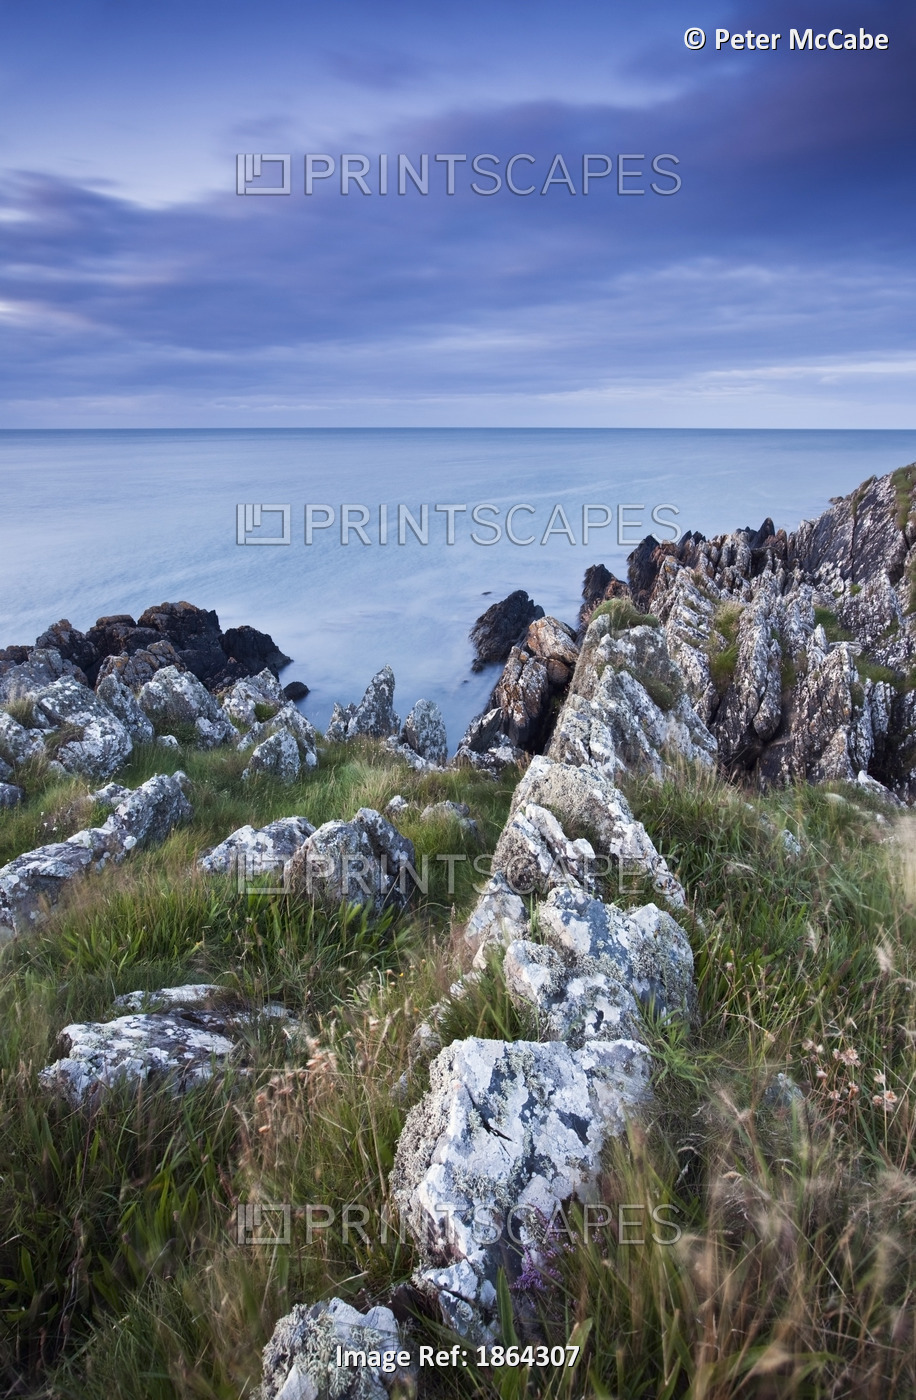 Seascape From Clogherhead, County Louth, Ireland